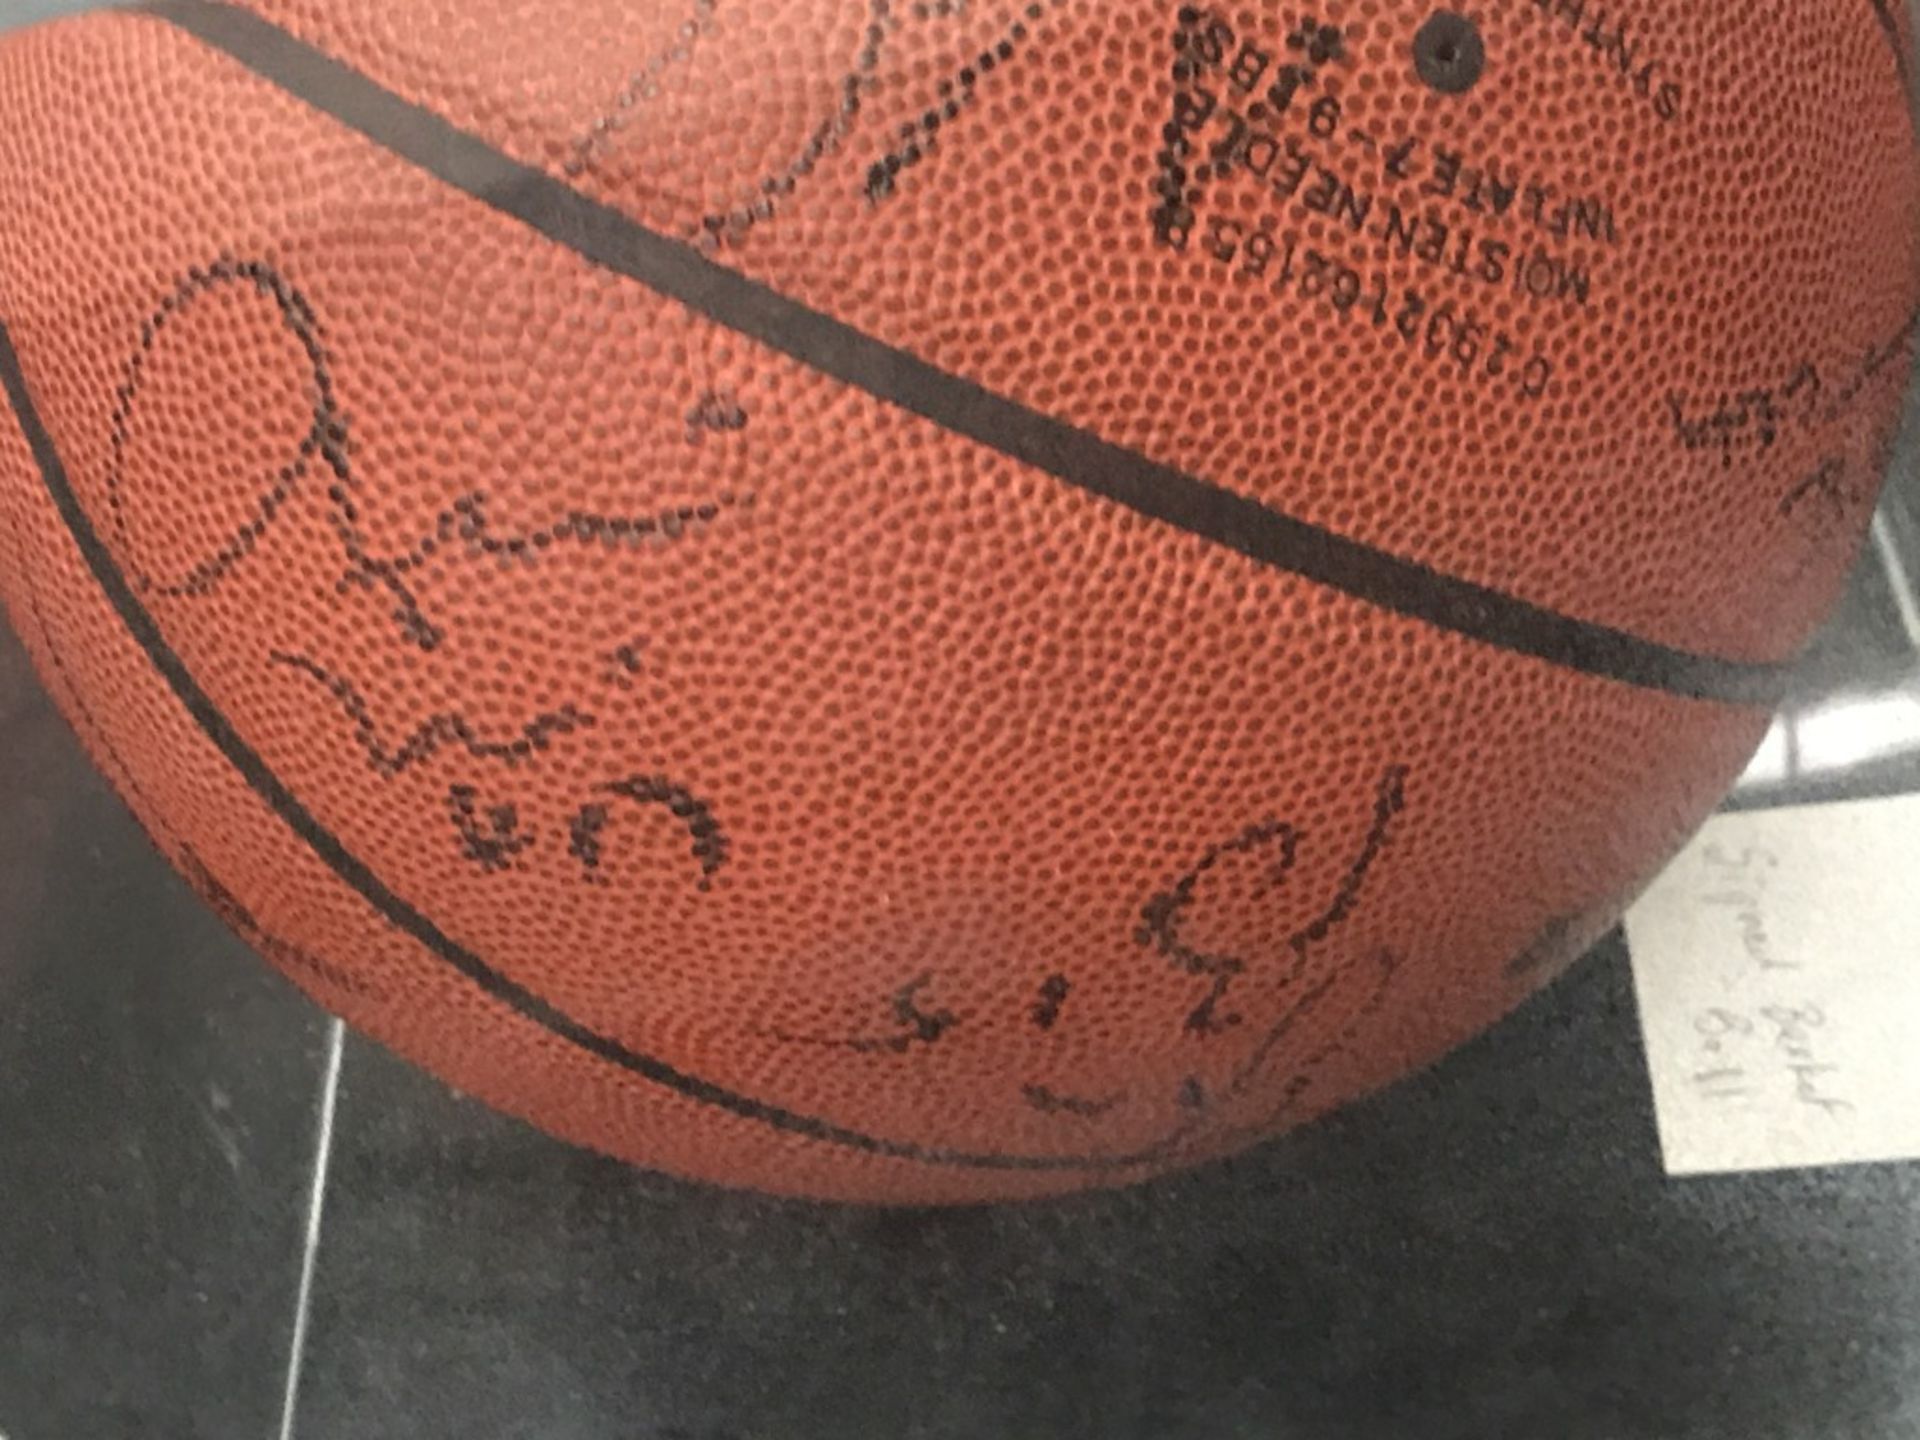 Basketball Signed by Rockets Team - Image 5 of 10